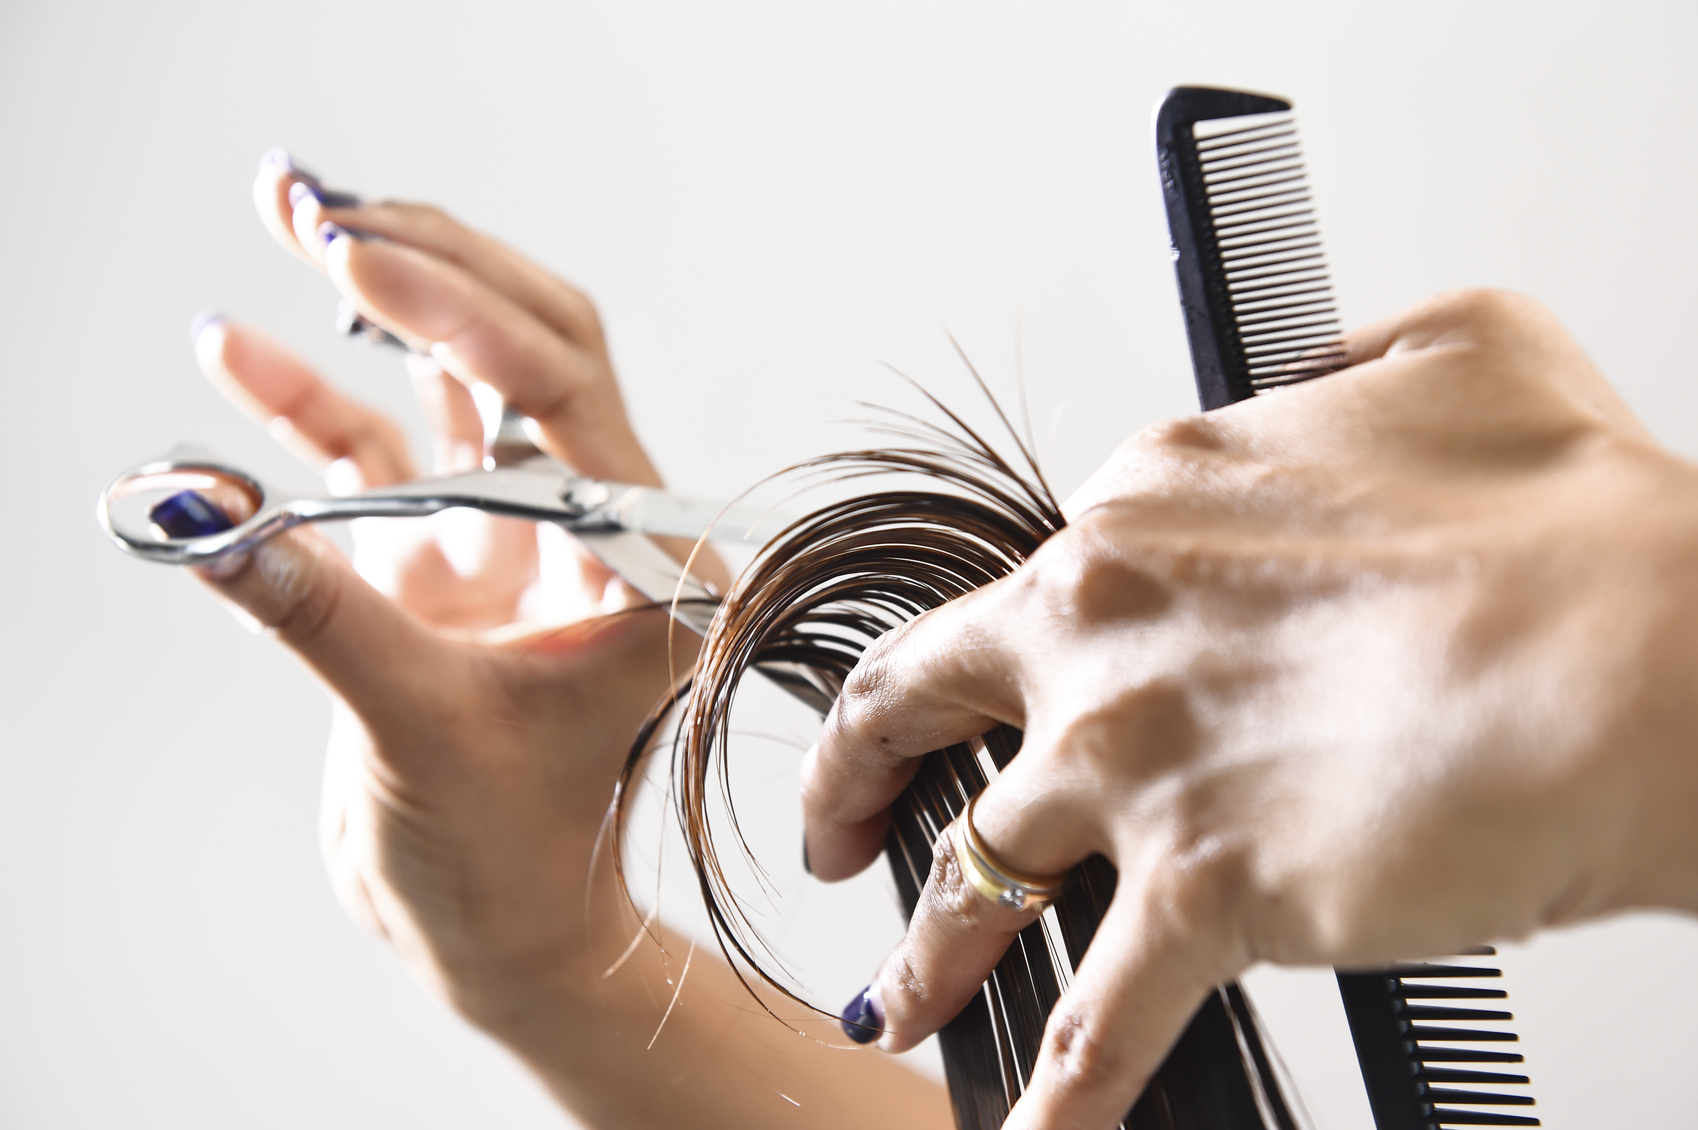 Hand with a comb cutting hair of woman